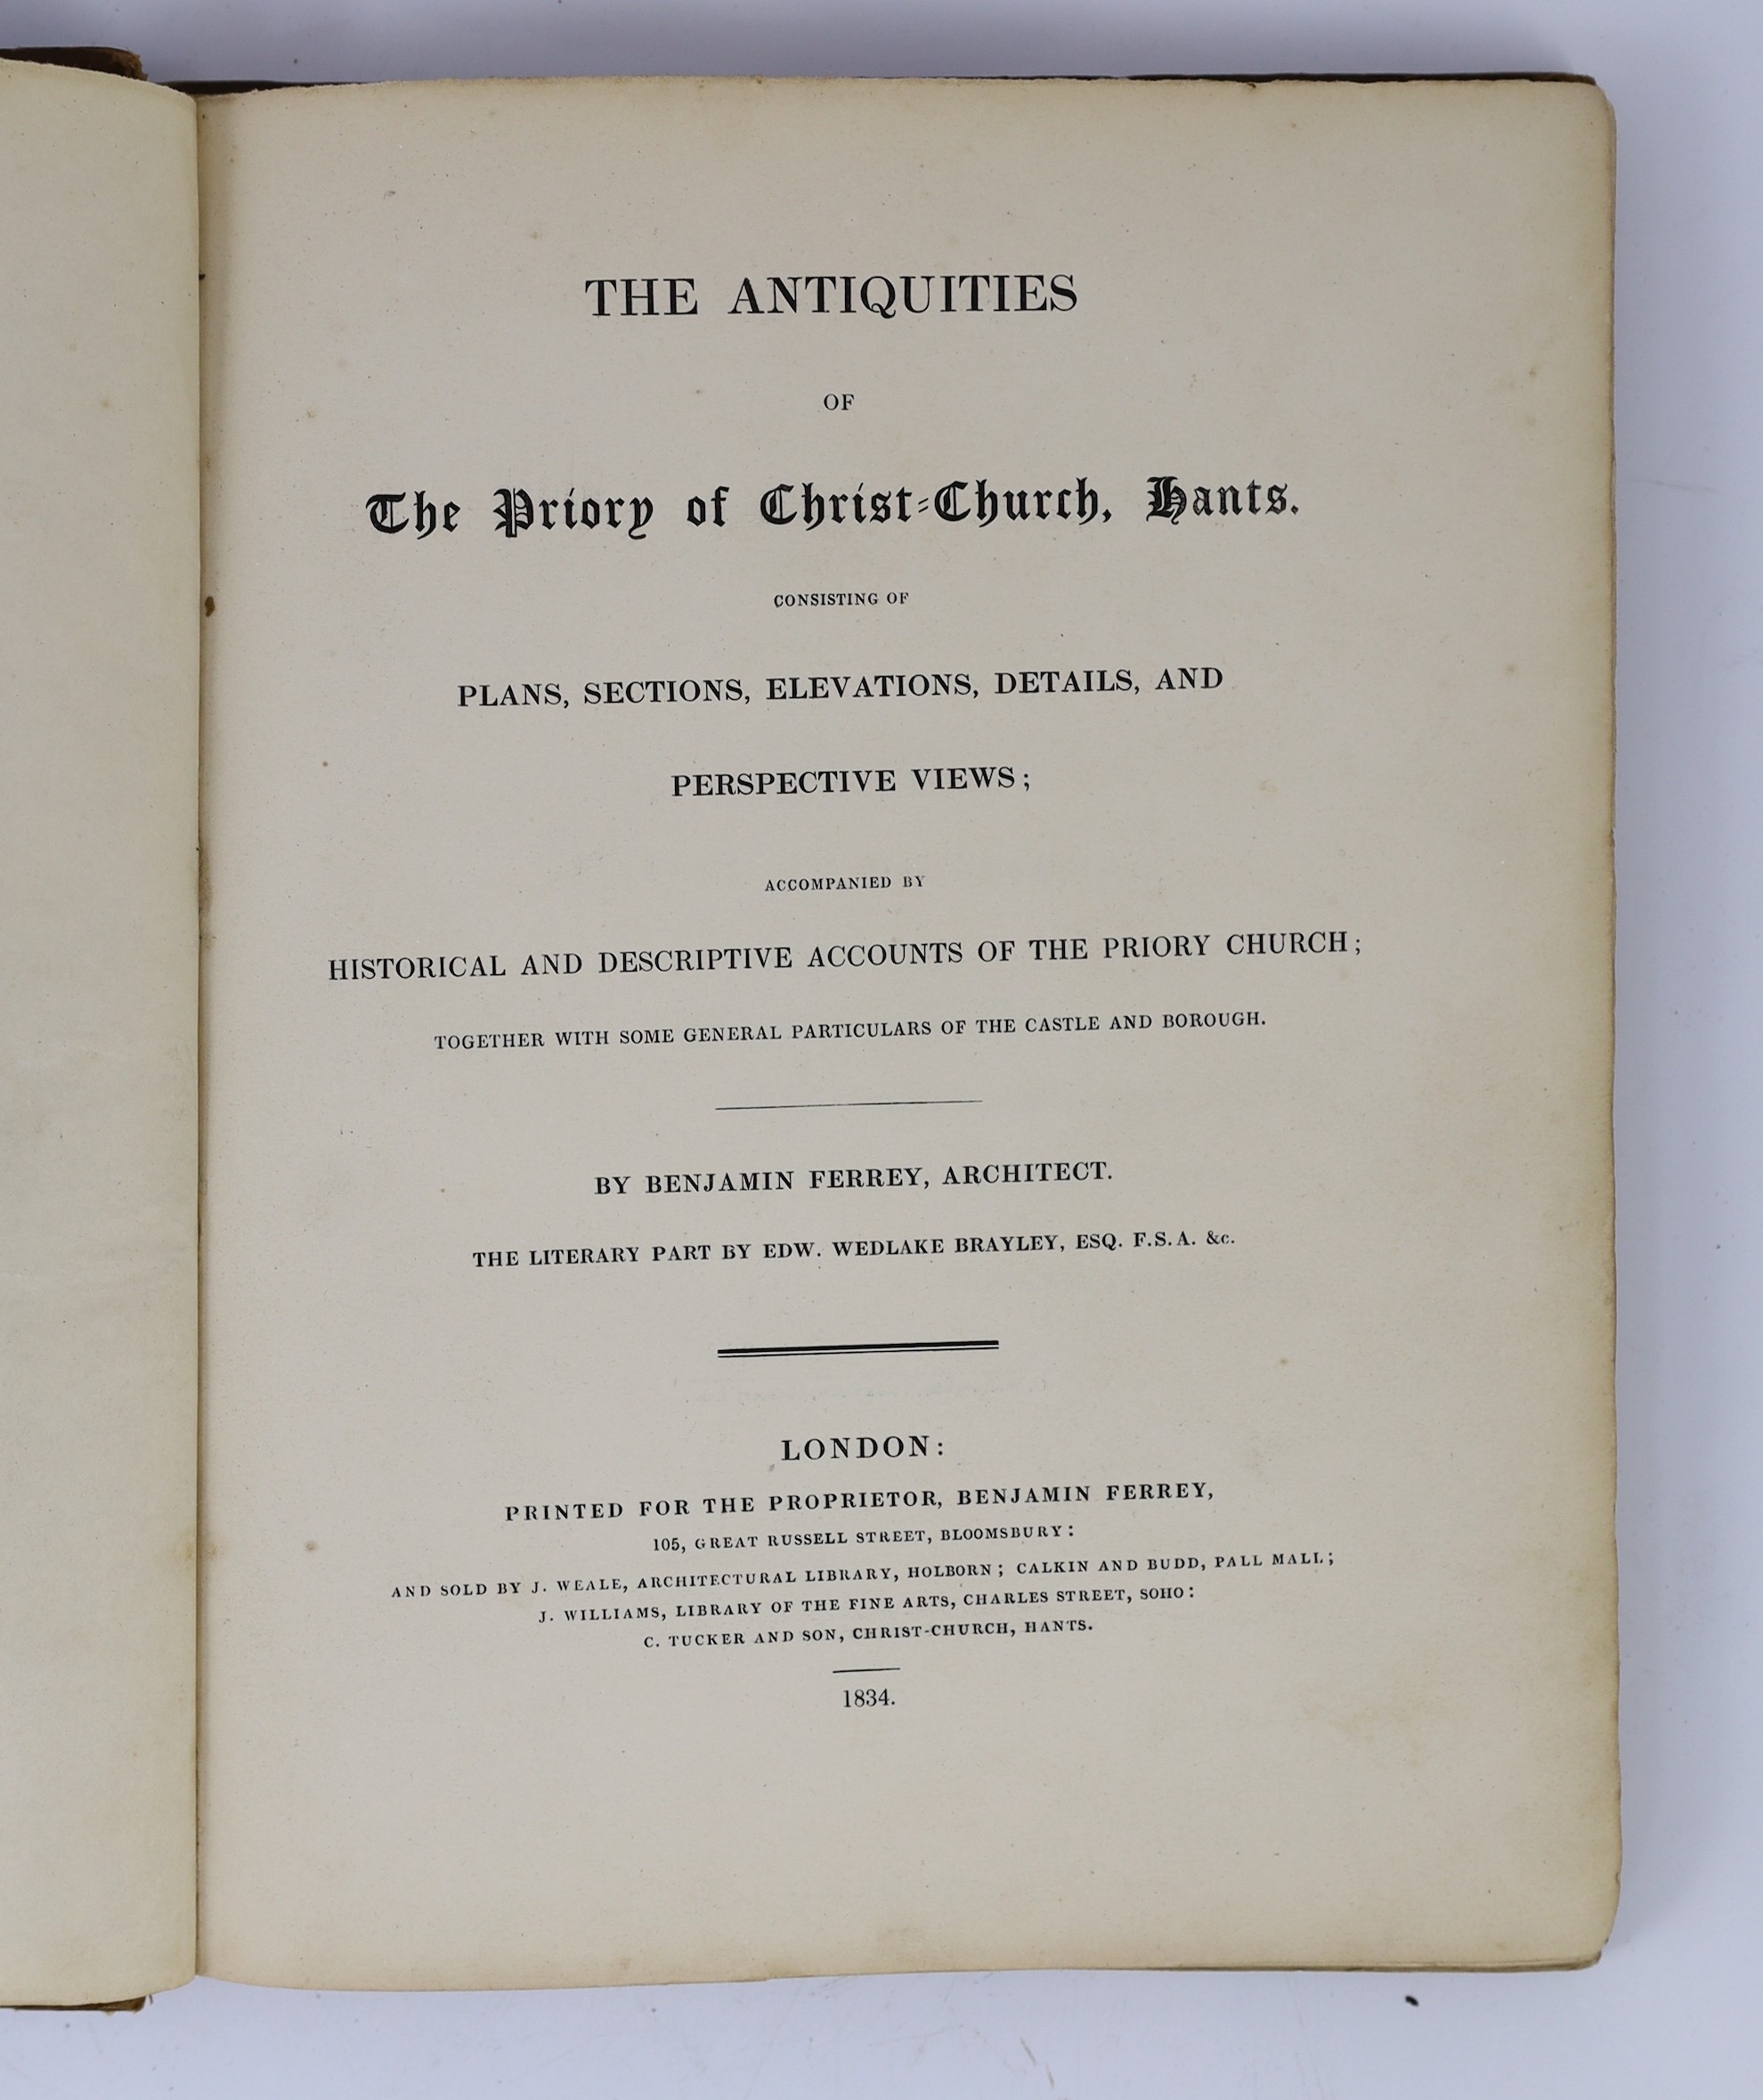 HANTS: Ferrey, Benjamin - The Antiquities of the Priory of Christ-Church, Hants. Consisting of plans, sections, elevations ... accompanied by historical and descriptive accounts ...